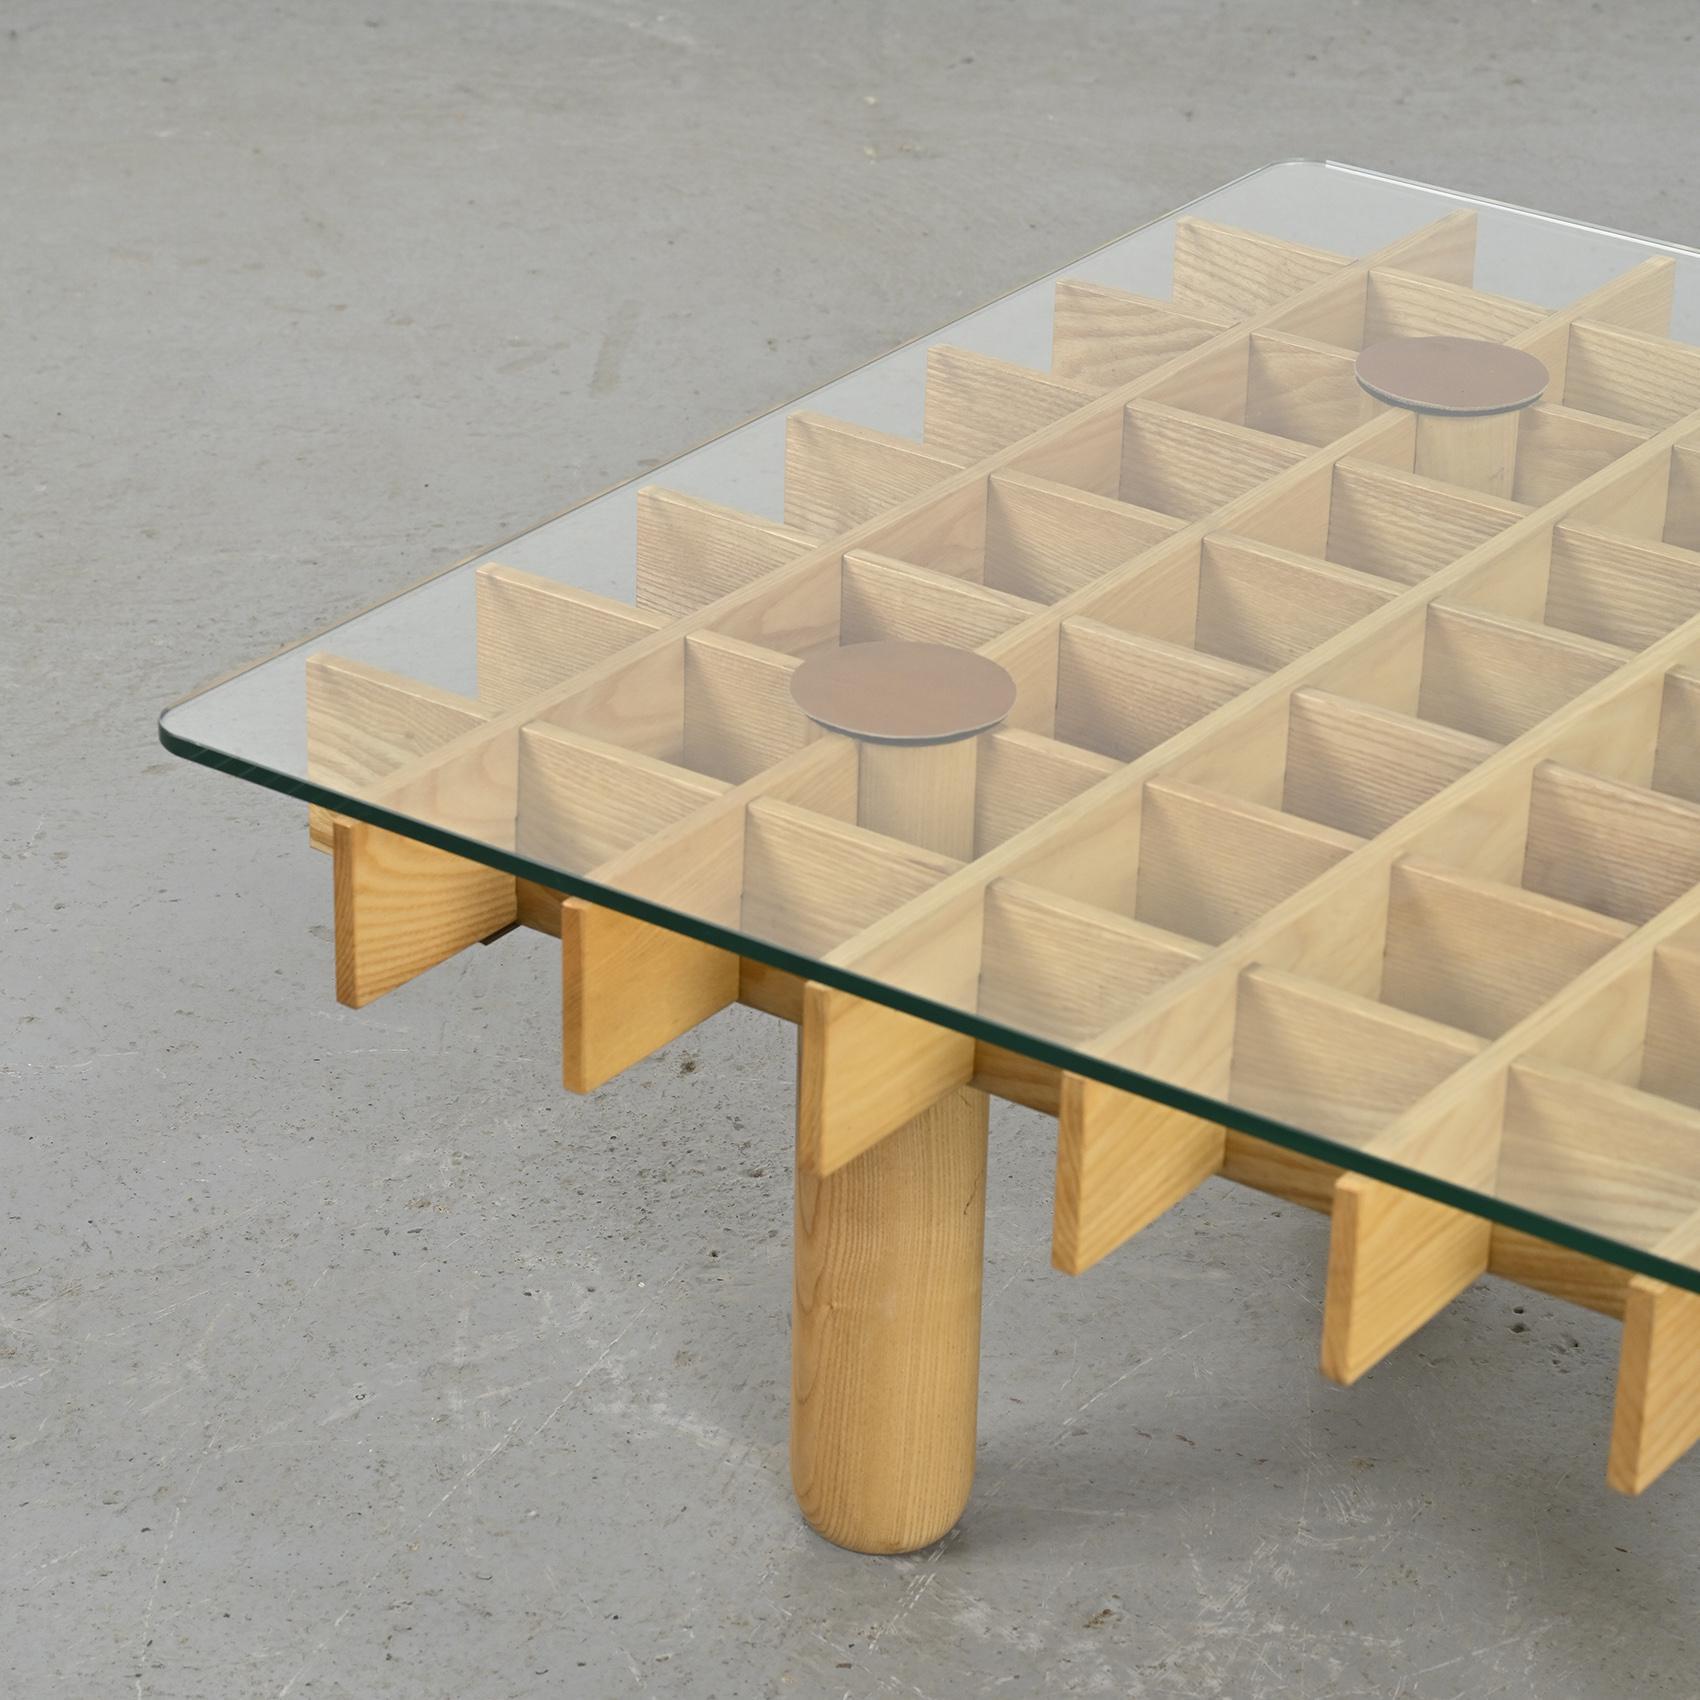 A graphic square coffee table designed by Gianfranco Frattini.

The structure is made up of turned ash wood legs and slats. The crystal top rests on four fawn-coloured vegetal leather discs.

Manufacturer: Ghianda, circa 1974.